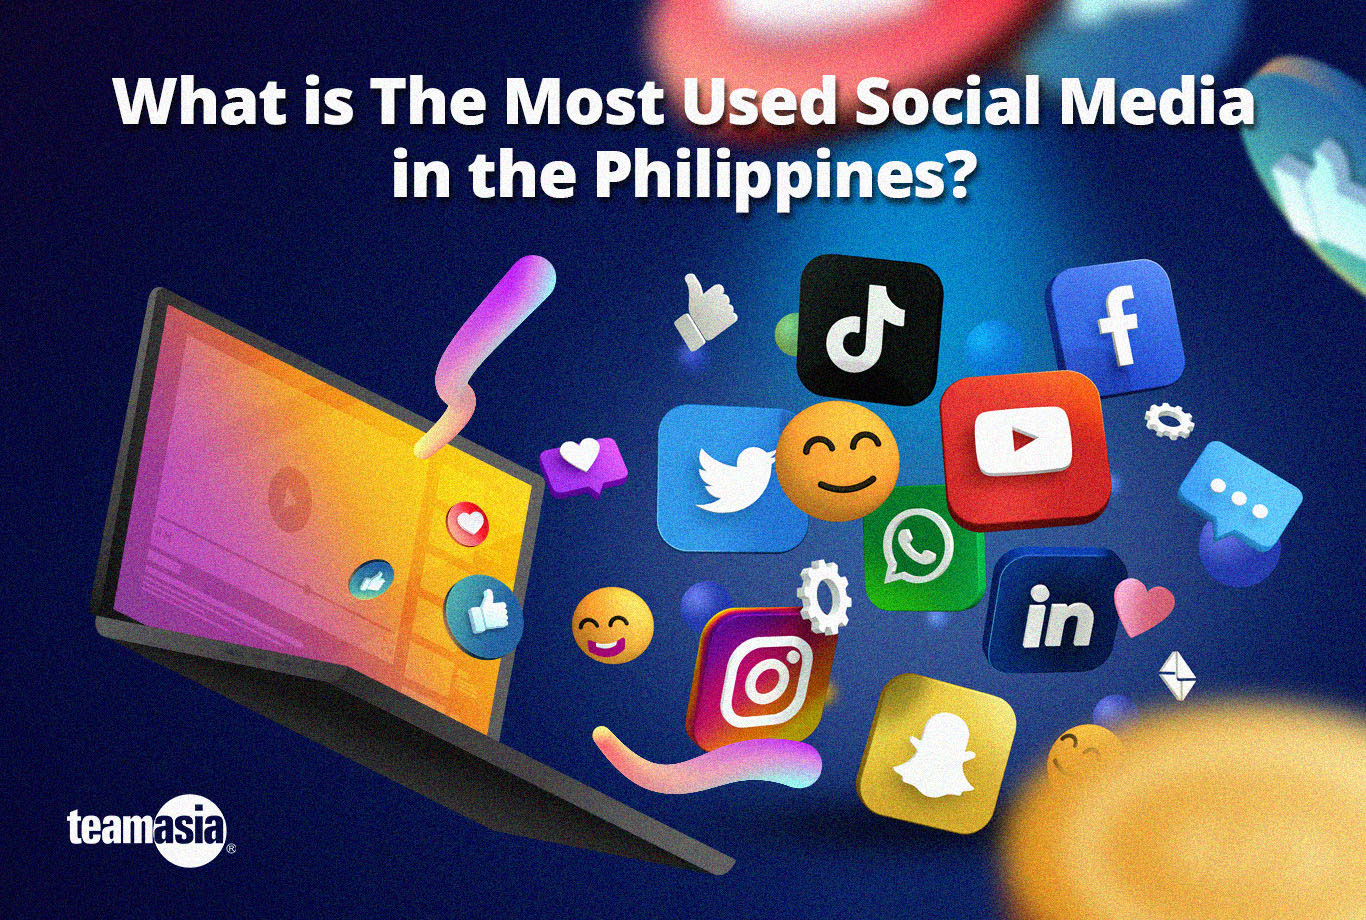 the most used social media in the philippines